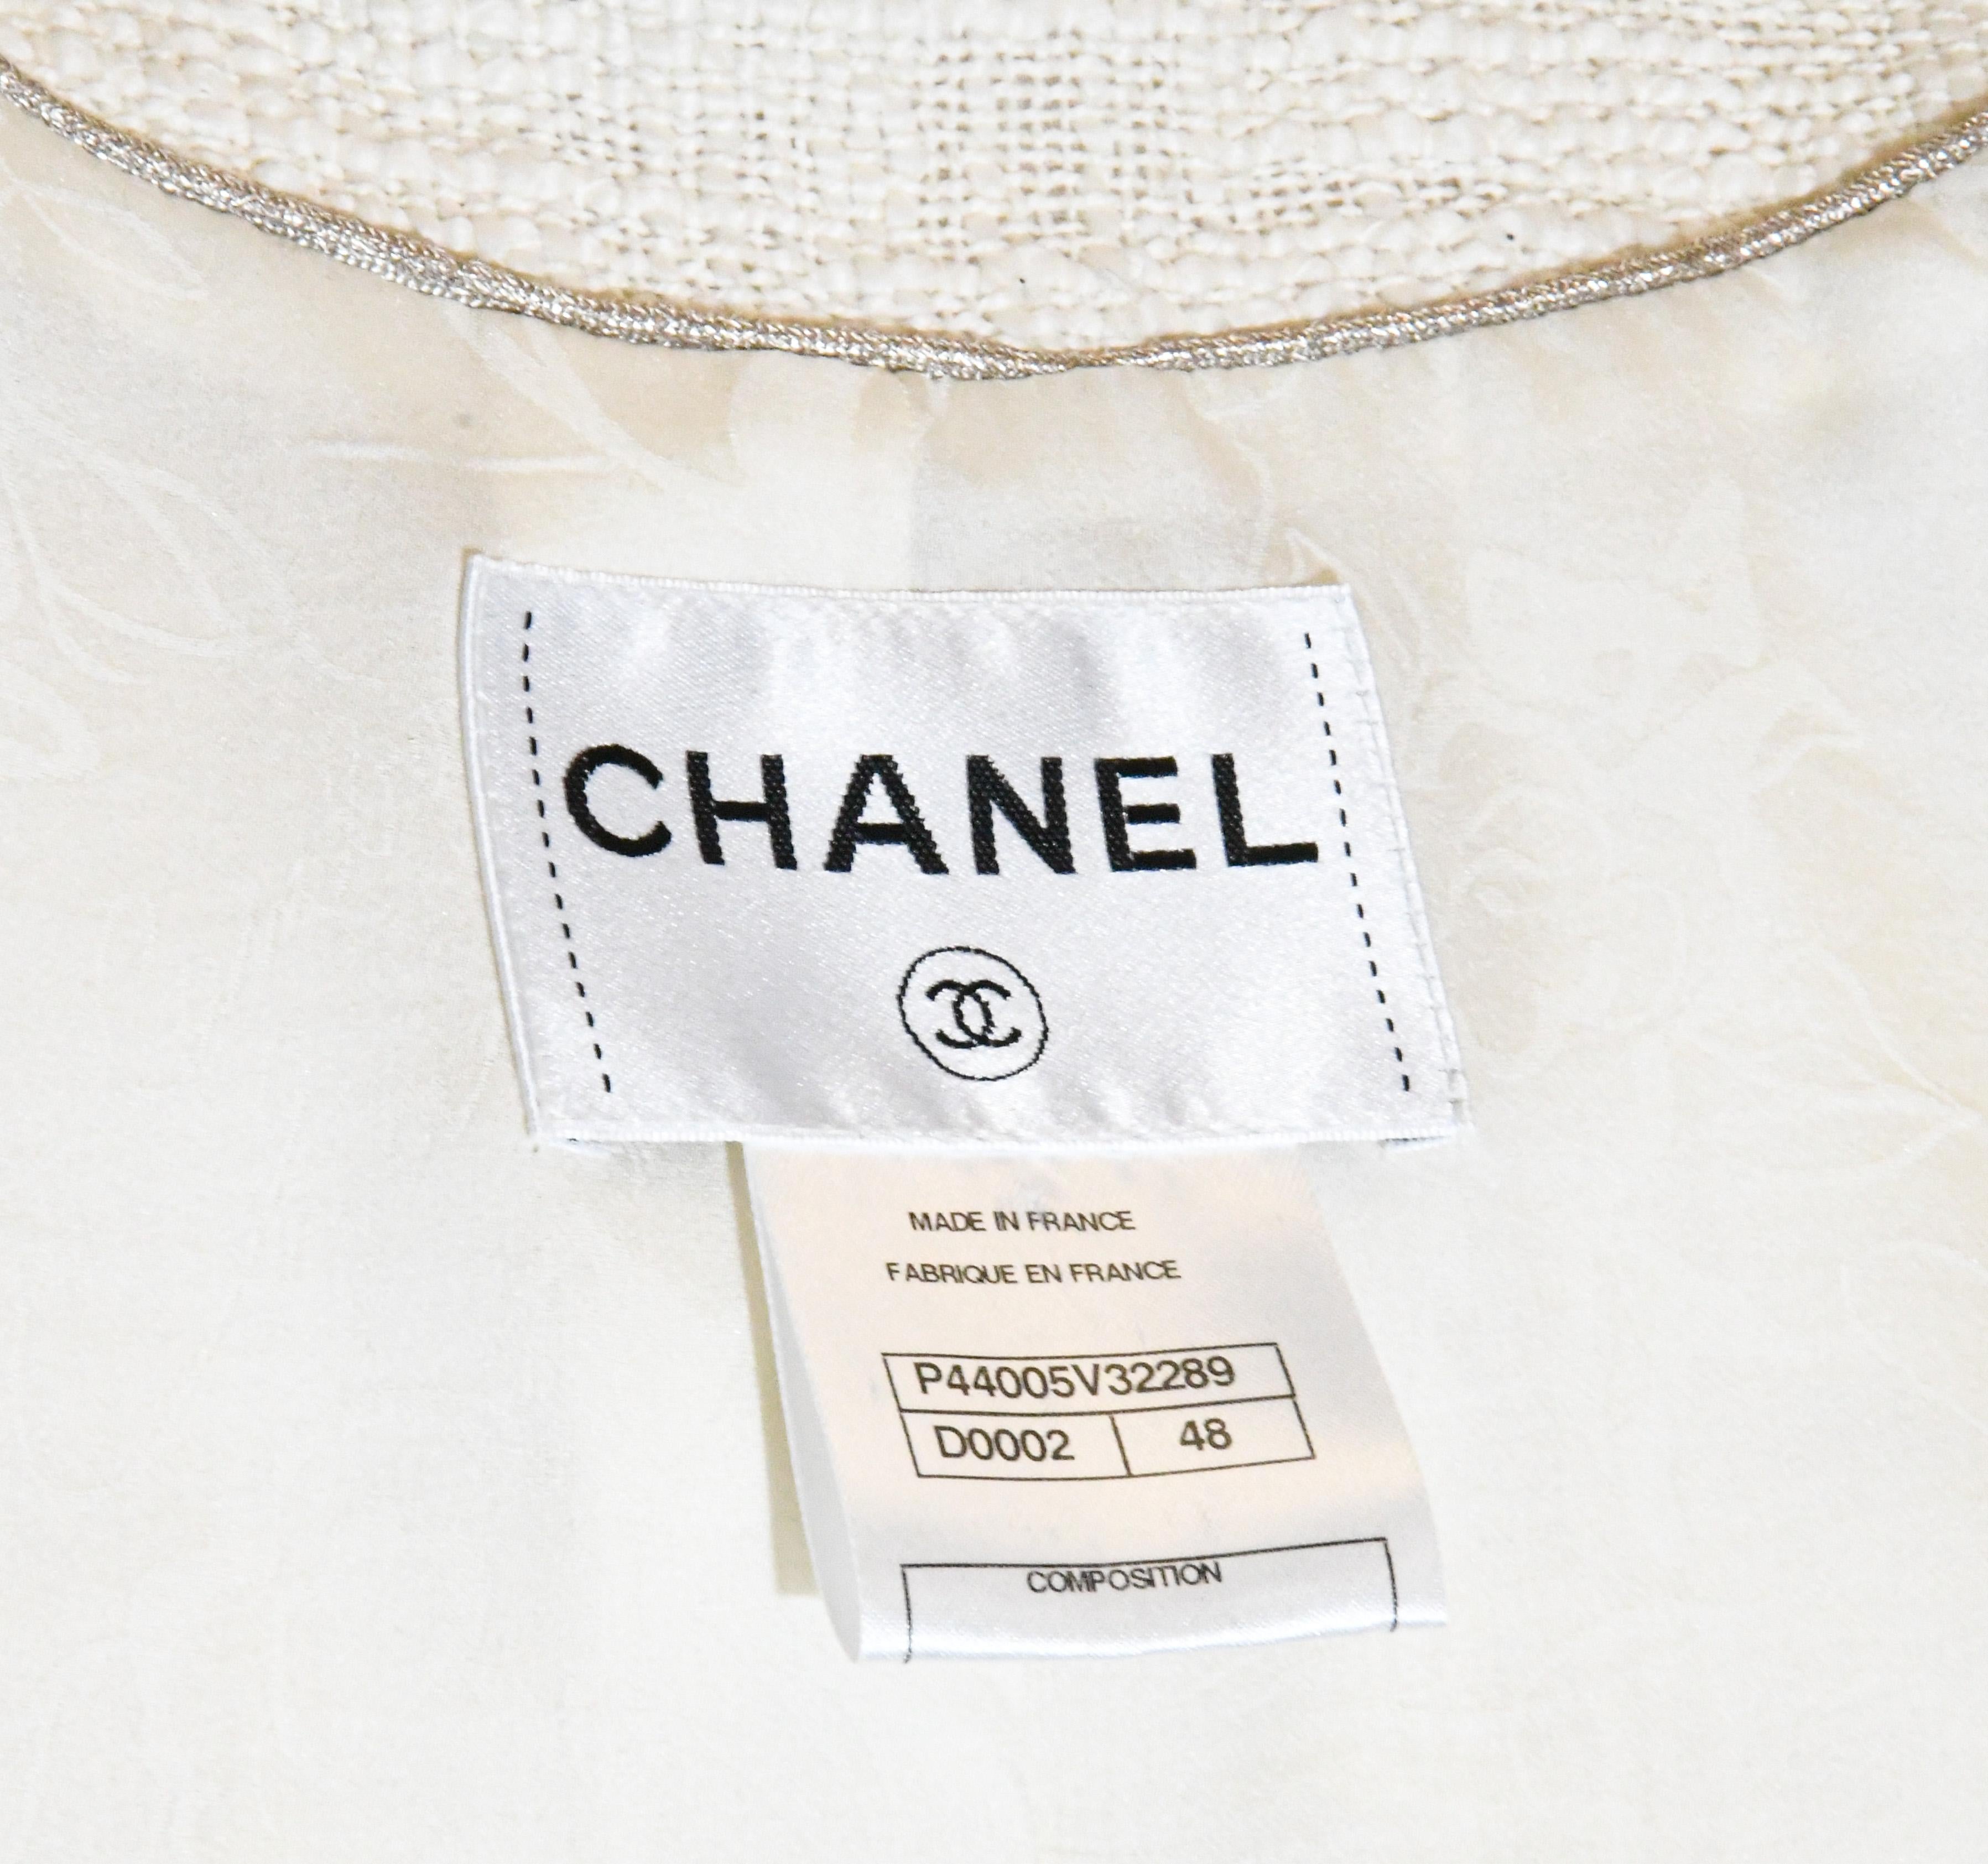 Gray Chanel Ivory Cotton Tweed Jacket With Gold Tone Chanel Buttons